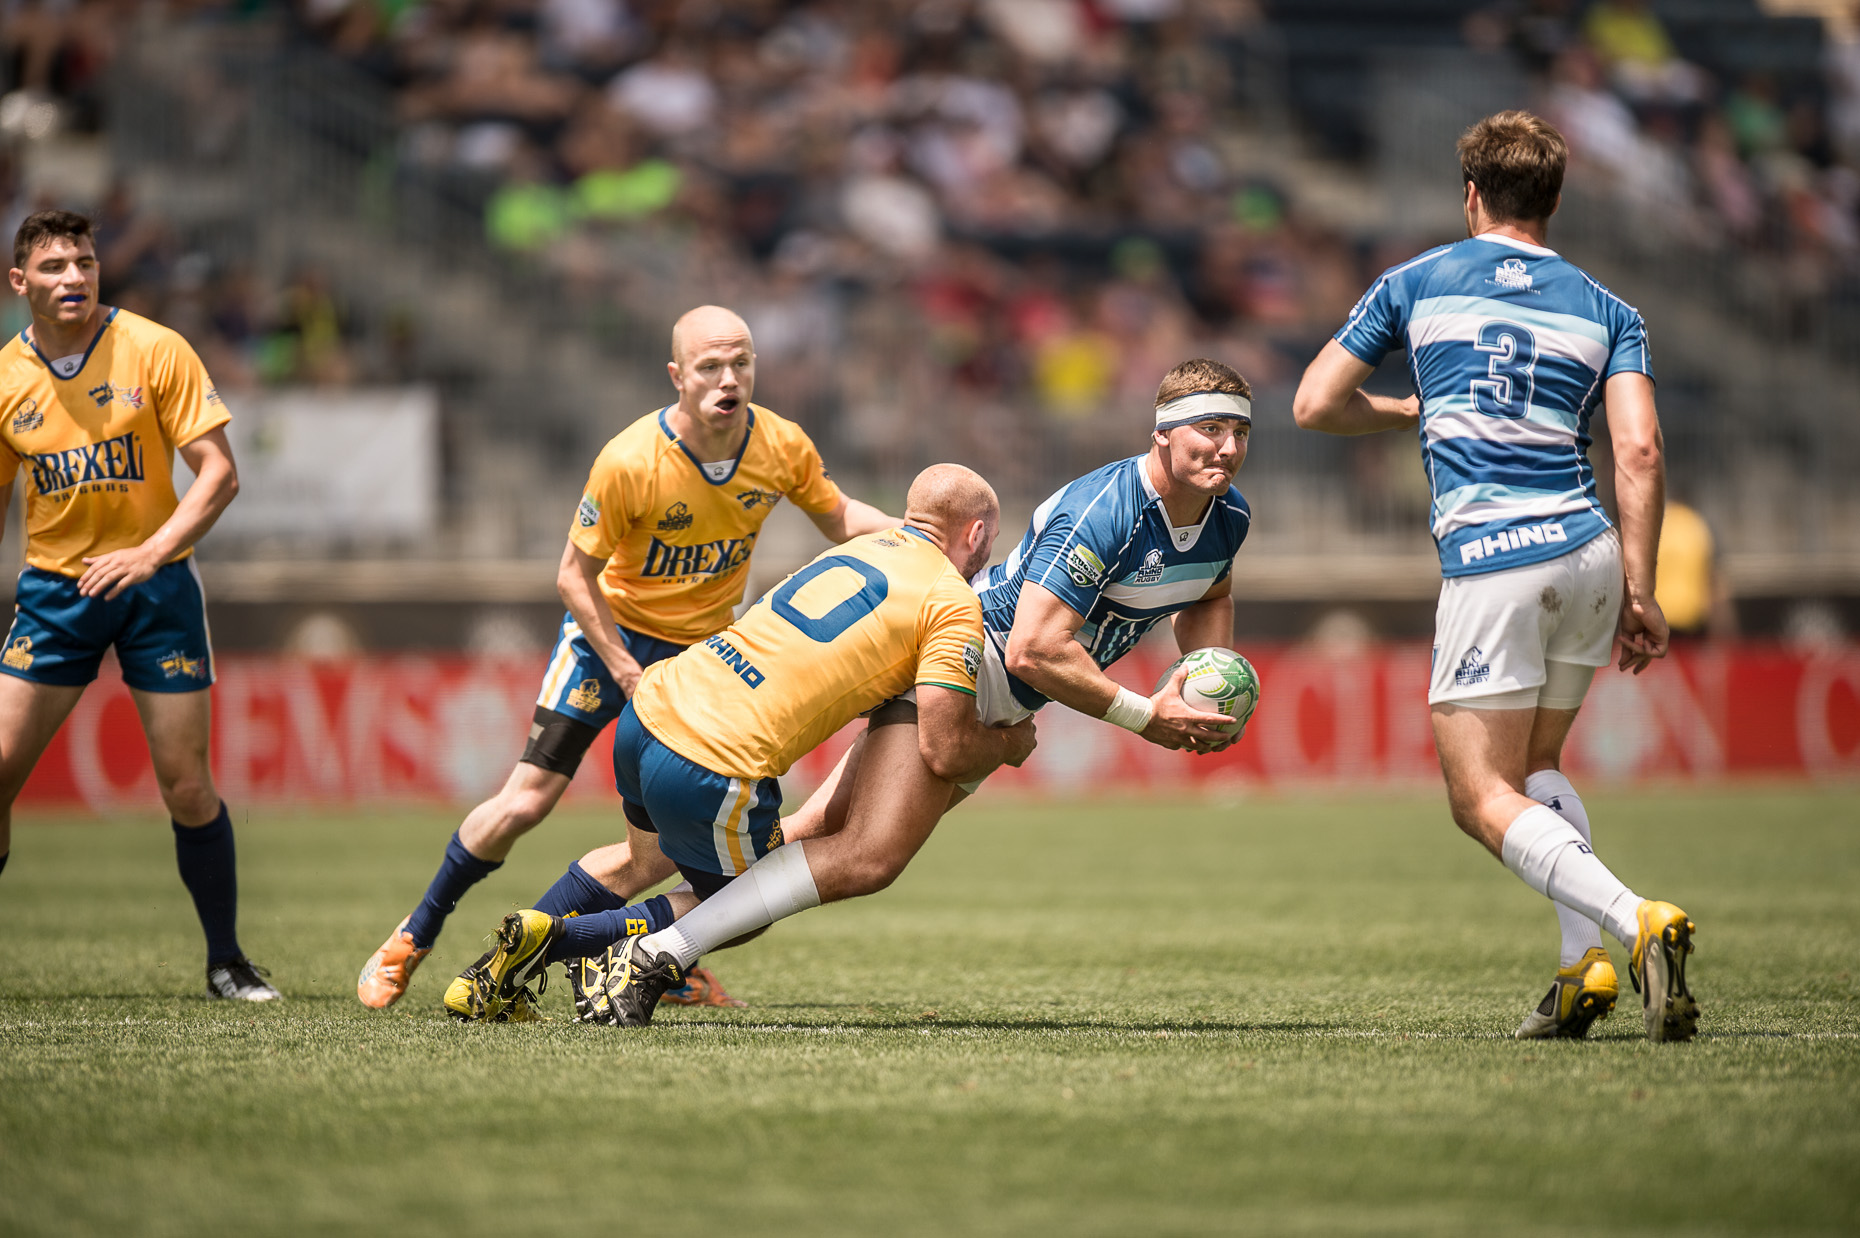 Rugby tackle | Philadelphia Commercial Photographer